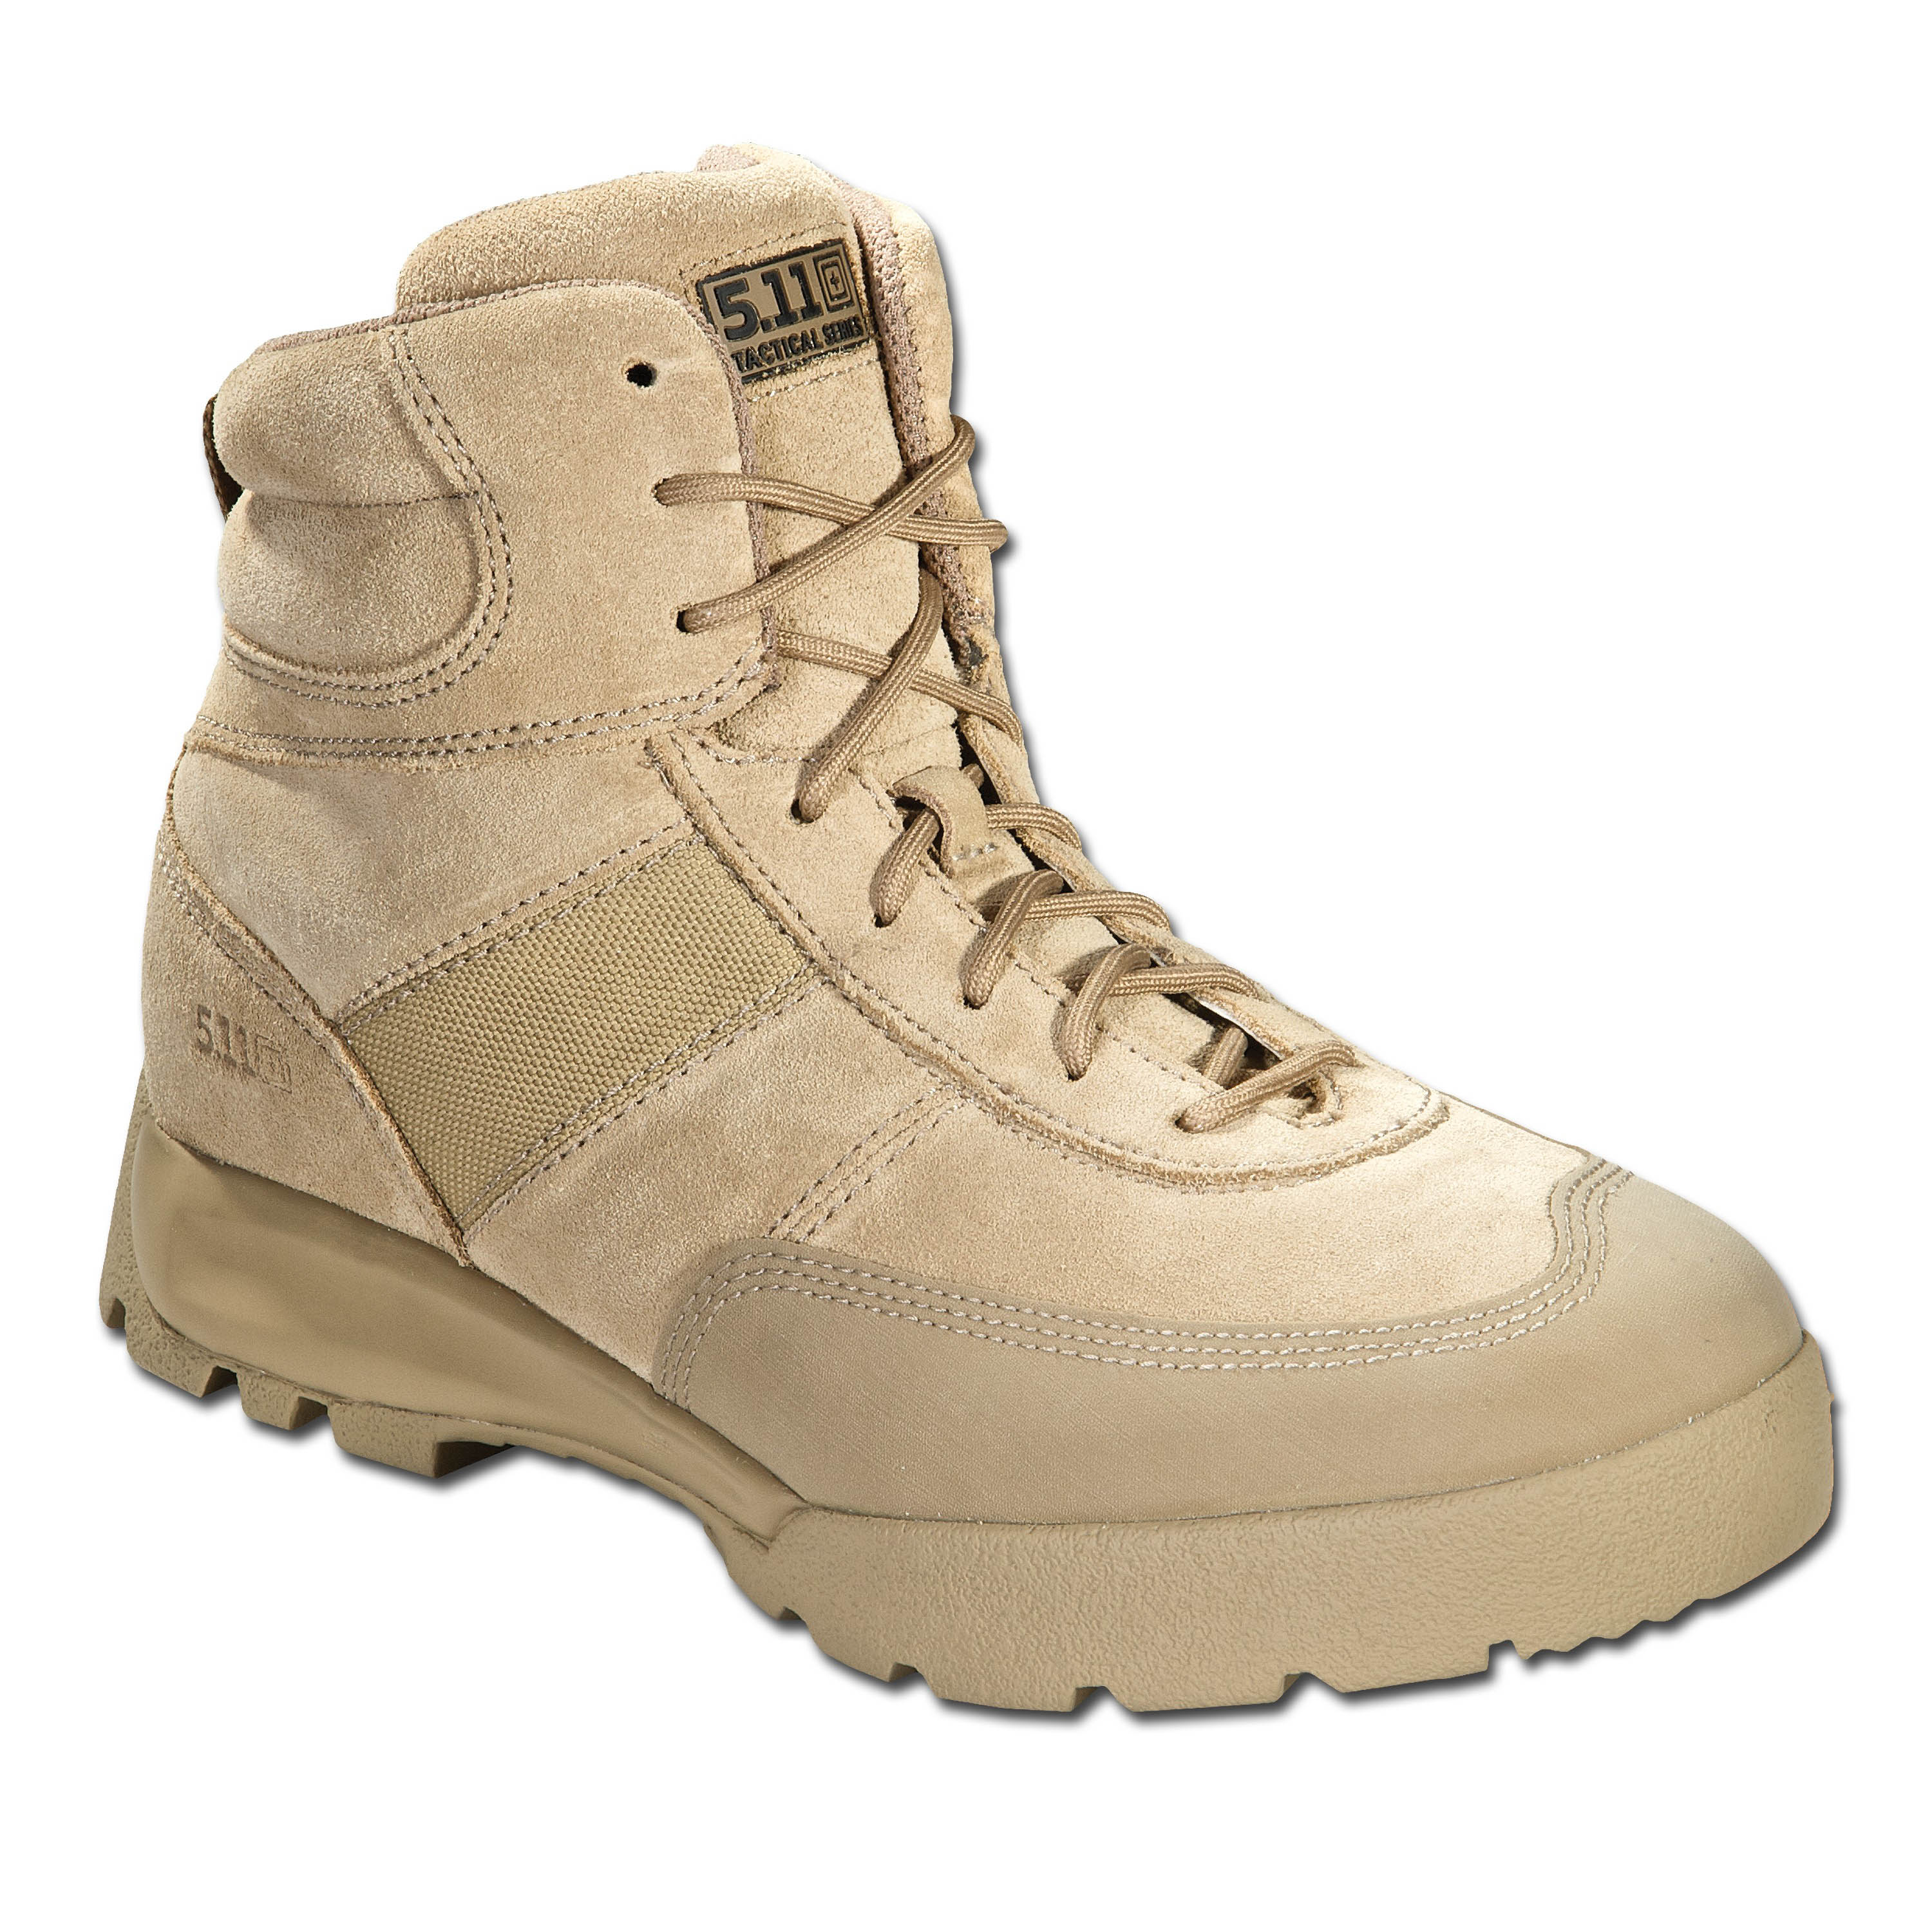 5.11 Advance Boots, coyote | 5.11 Advance Boots, coyote | Combat Boots ...